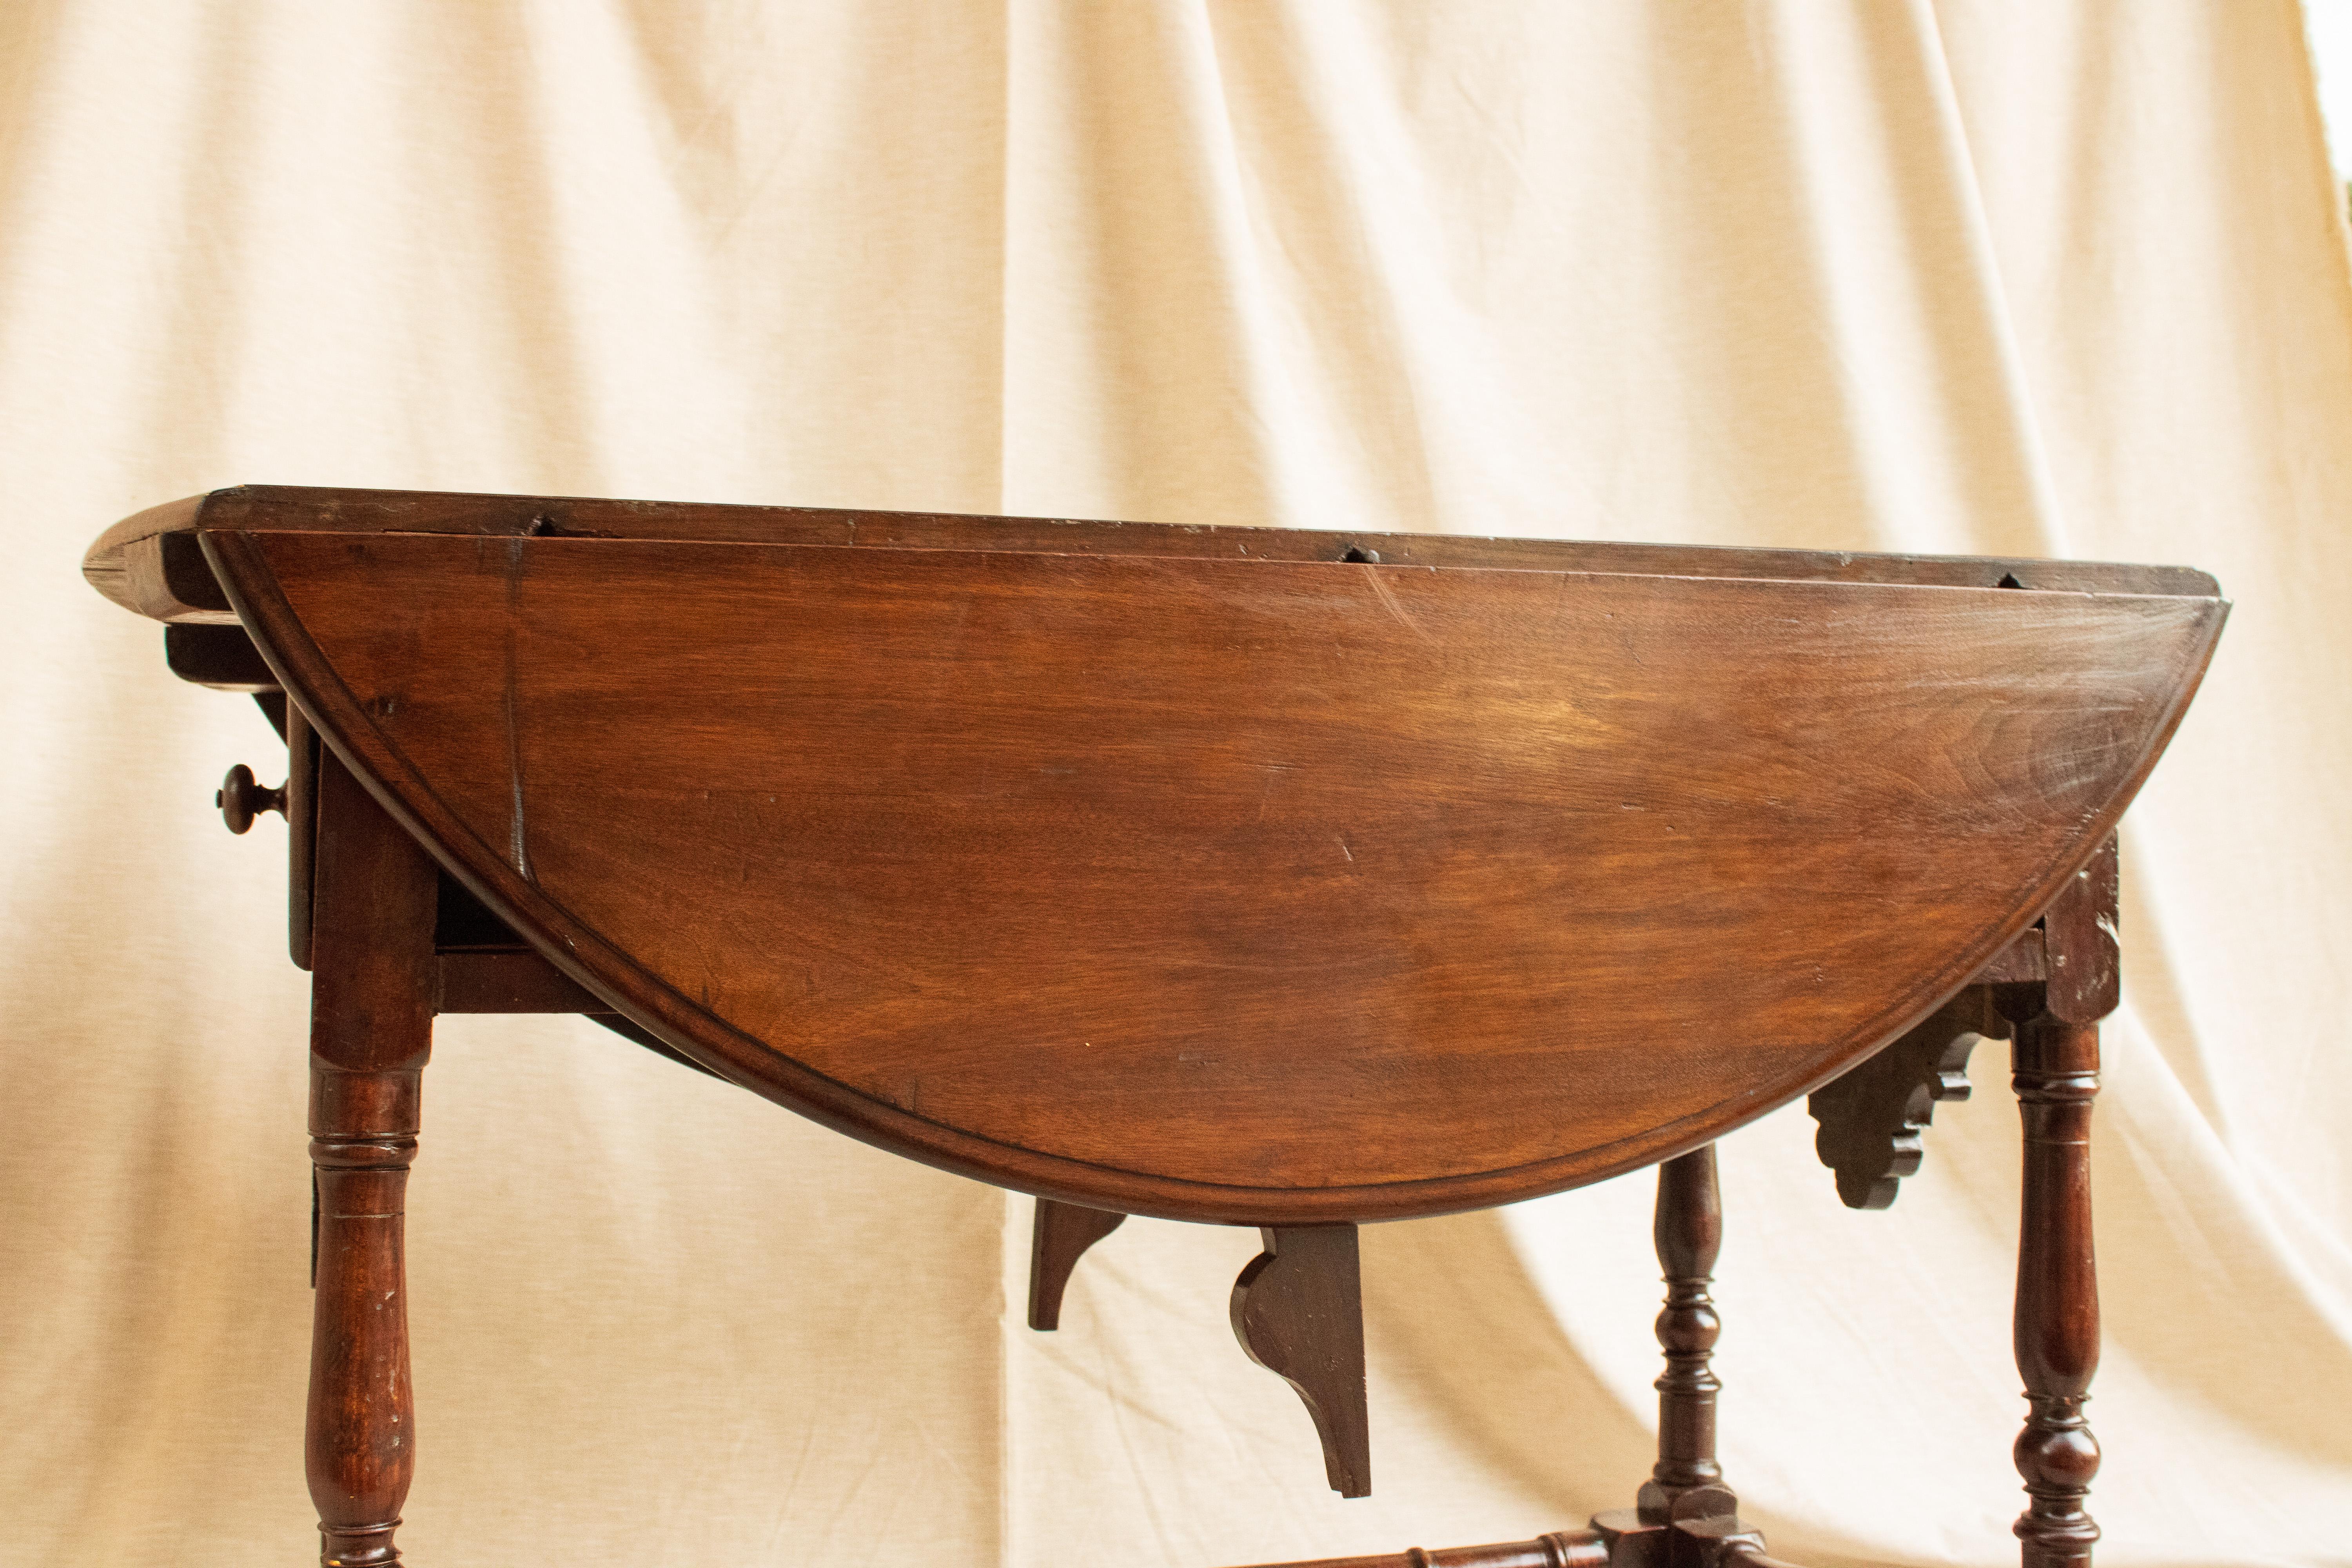 Spanish XVIII Century Fine Wood Table w/Wings and Two Drawers - Spain 1790 For Sale